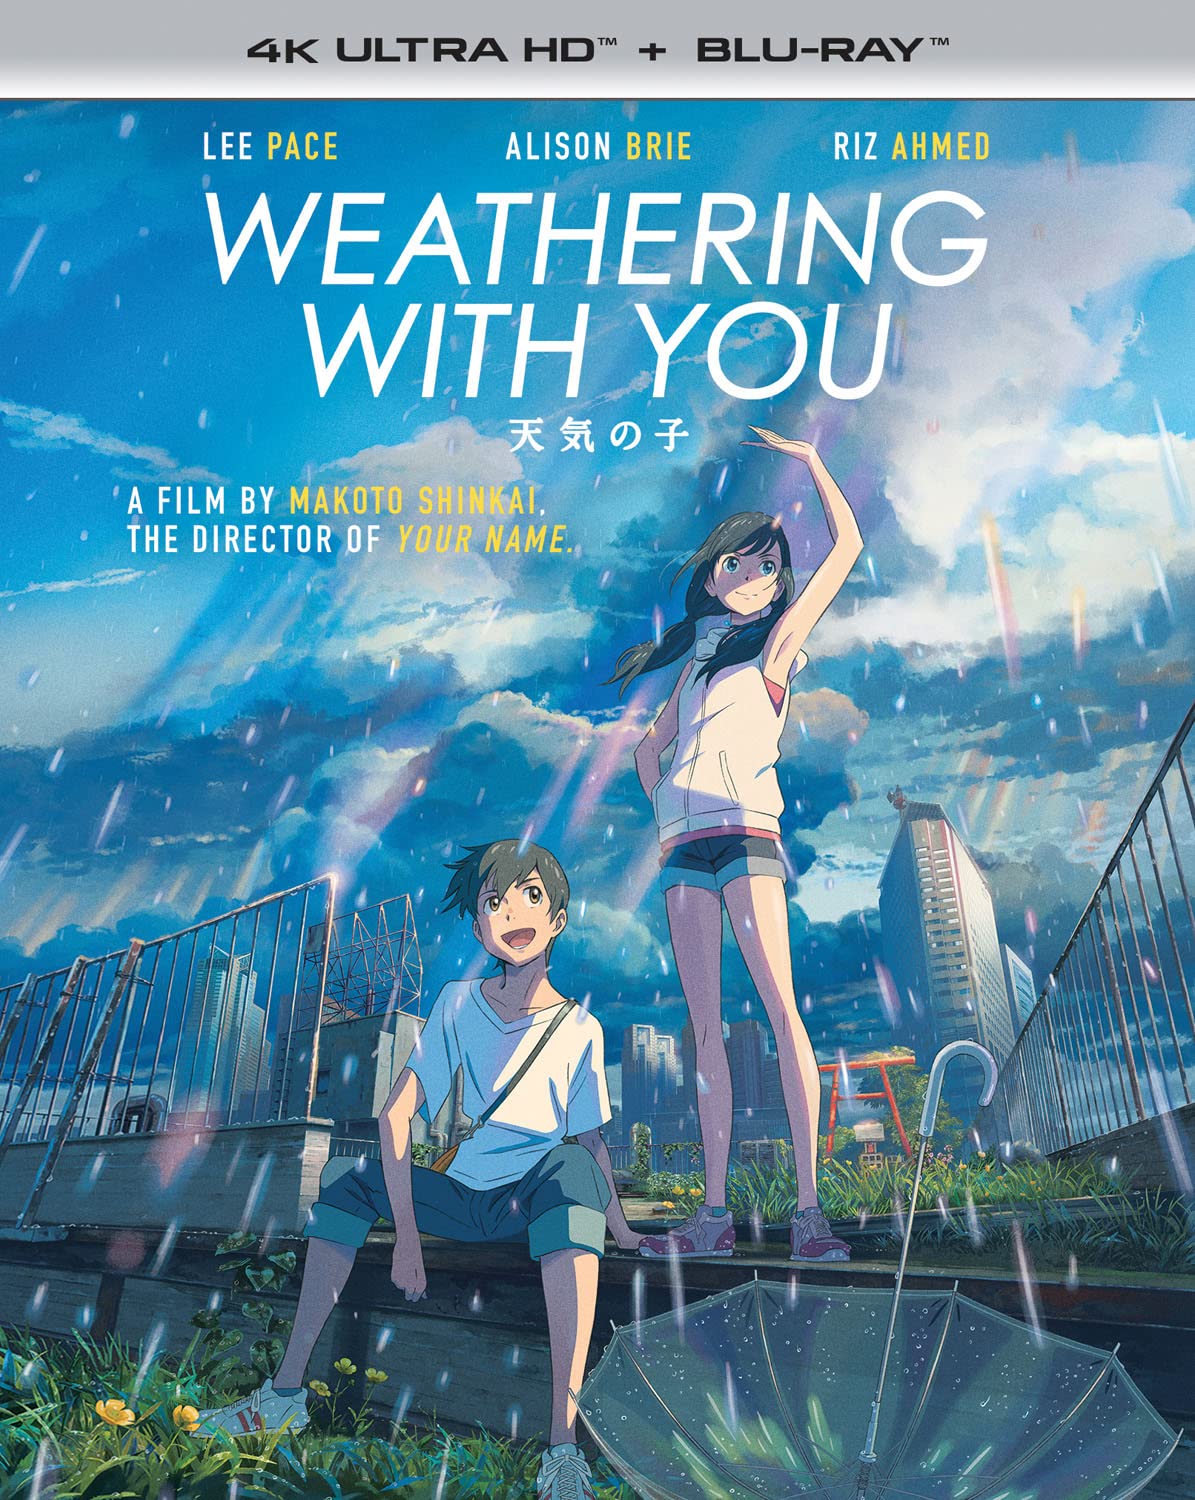 Weathering With You 2-disc 4k Blu-ray